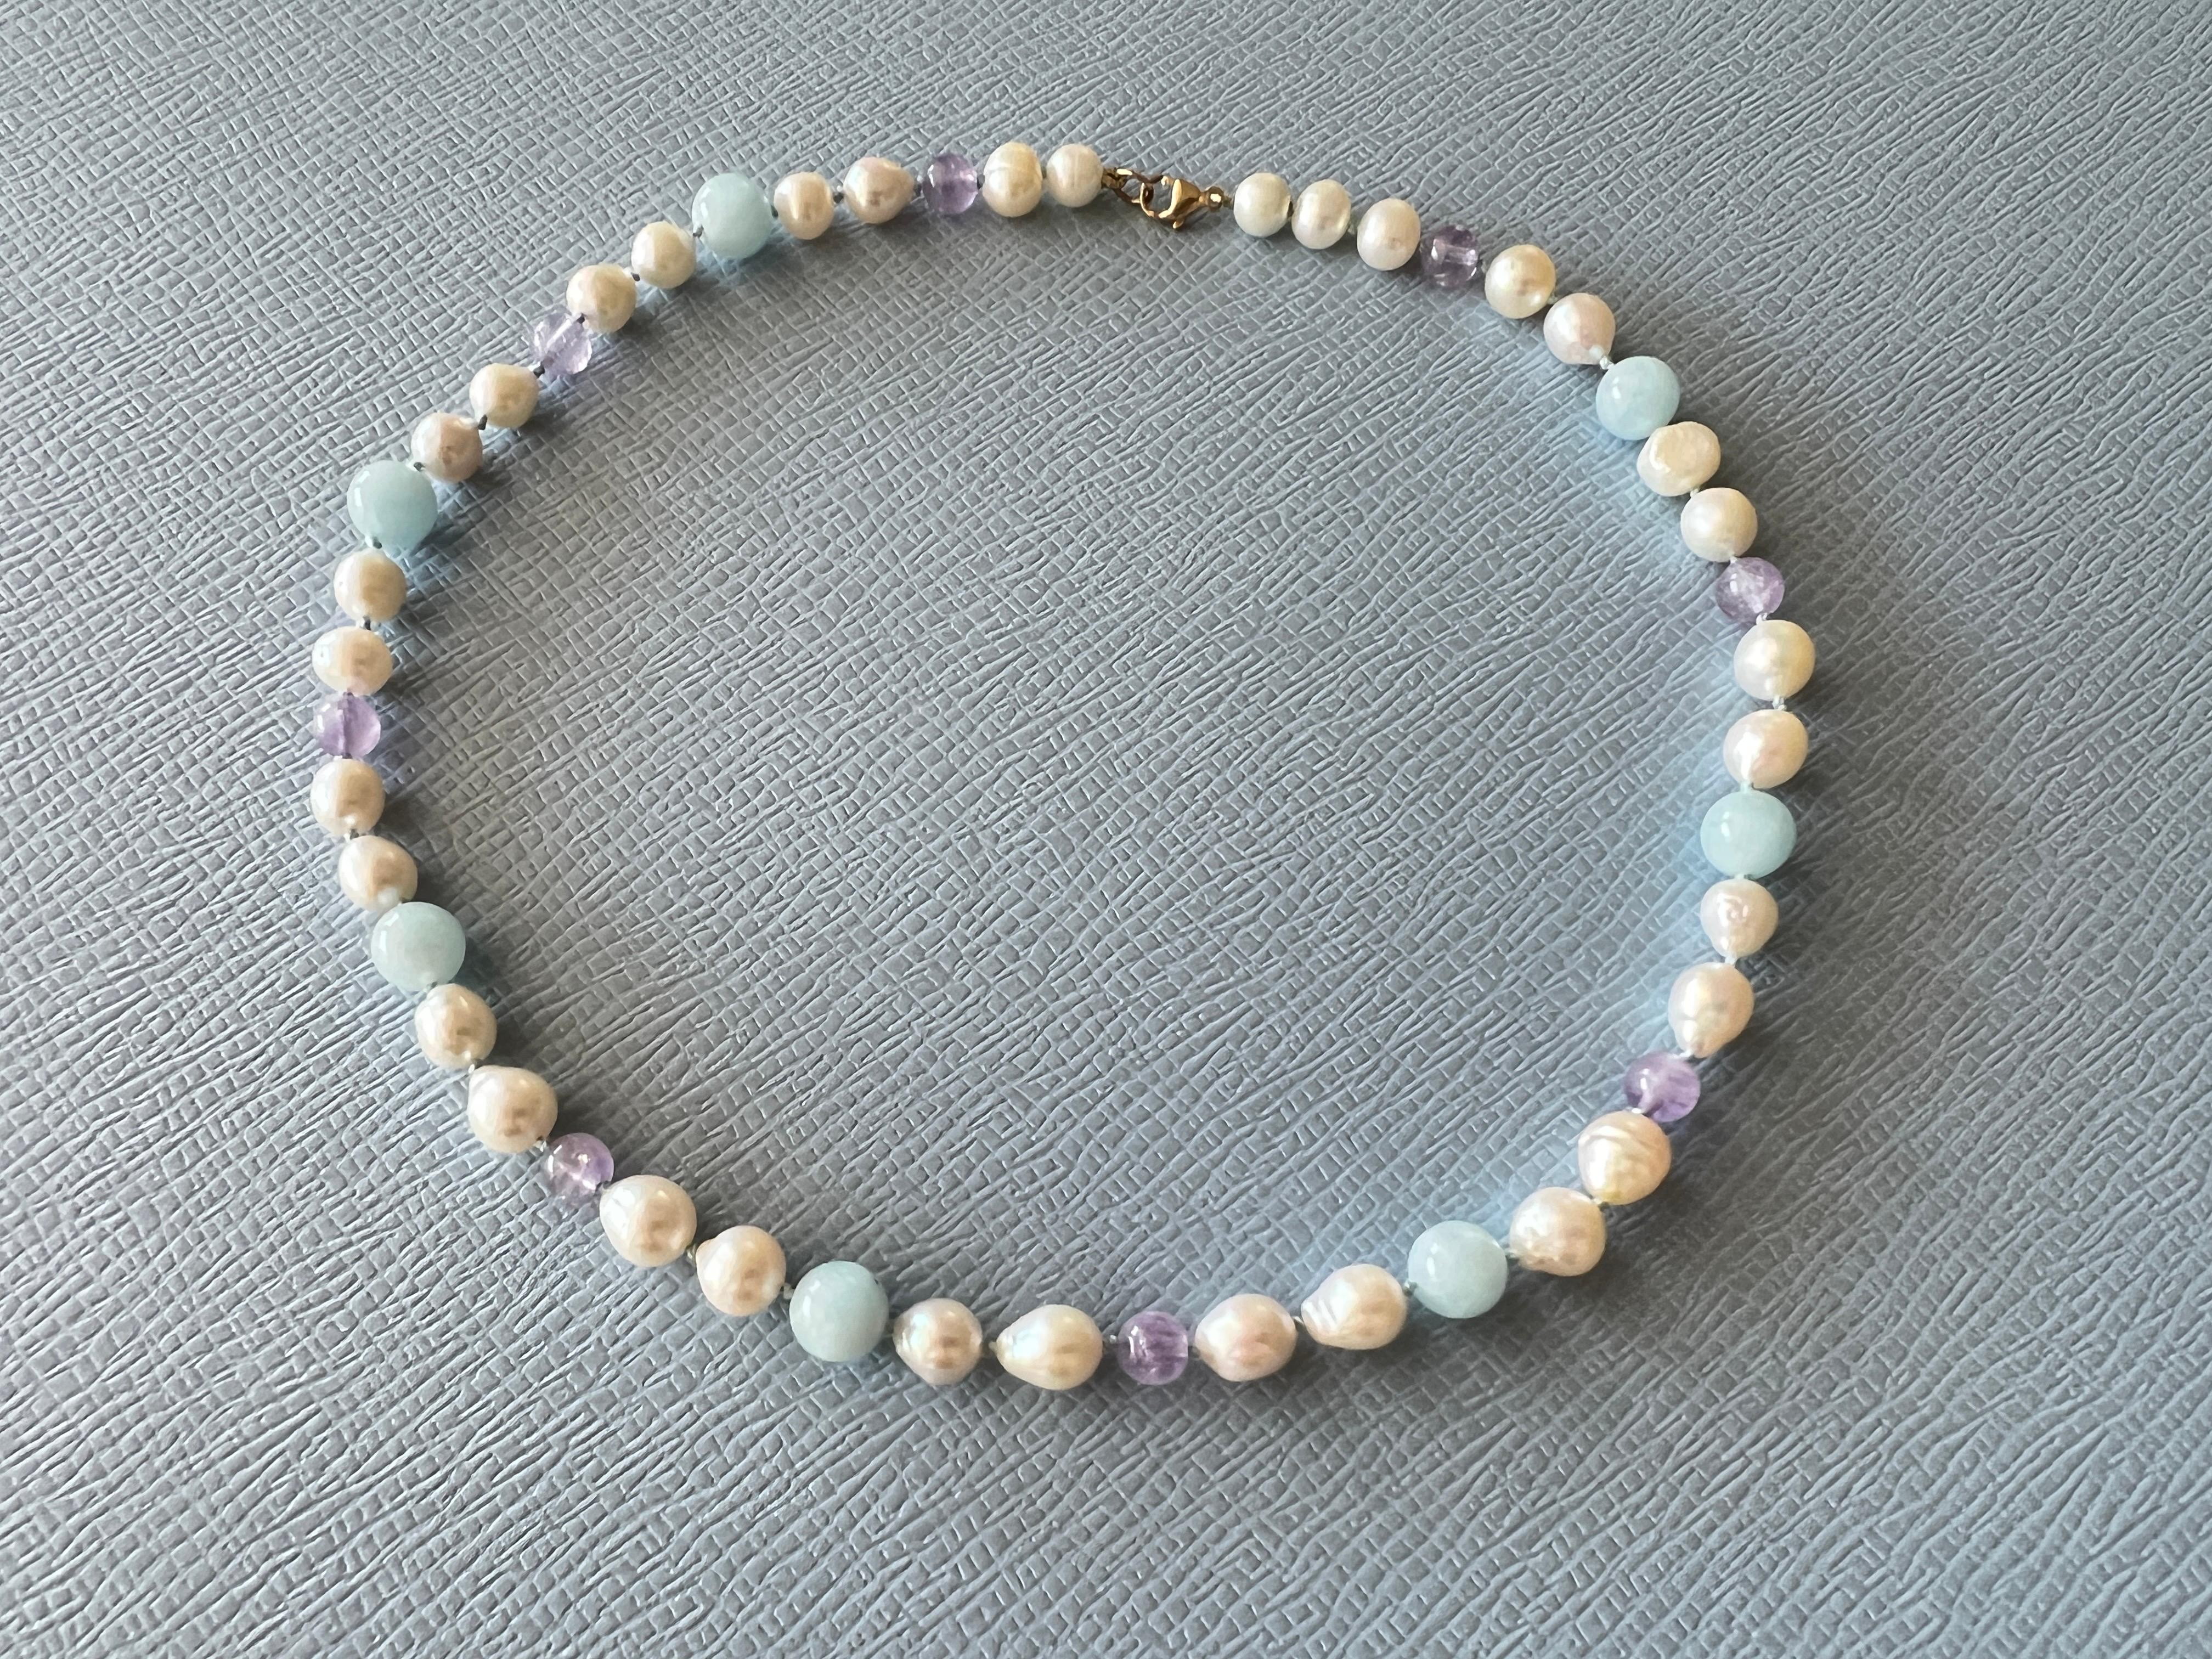 Women's Aquamarine Amethyst Pearl Choker Bead Necklace Gold Filled J Dauphin For Sale